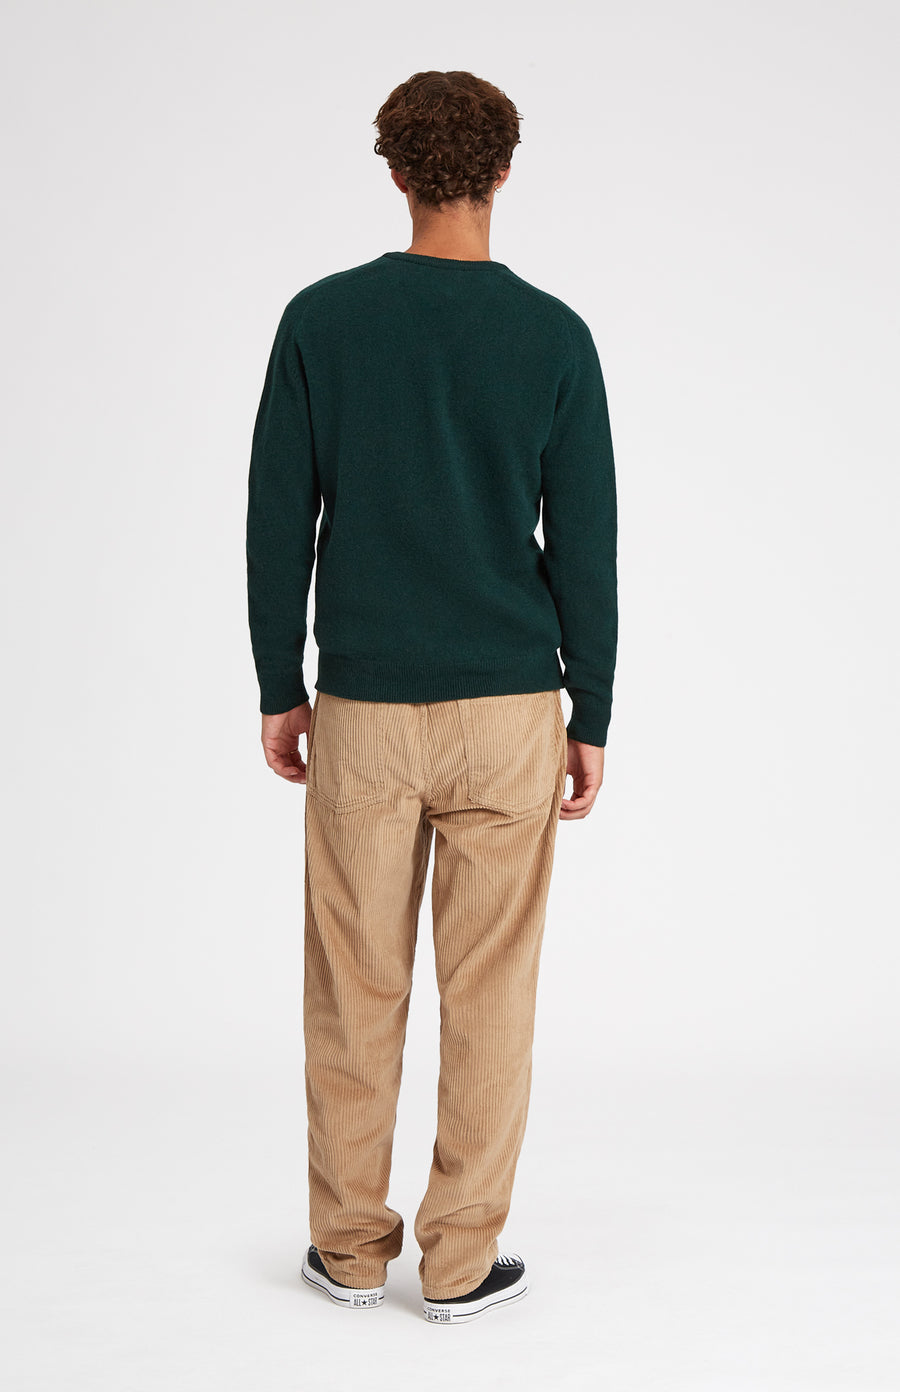 V Neck Lambswool Jumper In Evergreen rear view - Pringle of Scotland